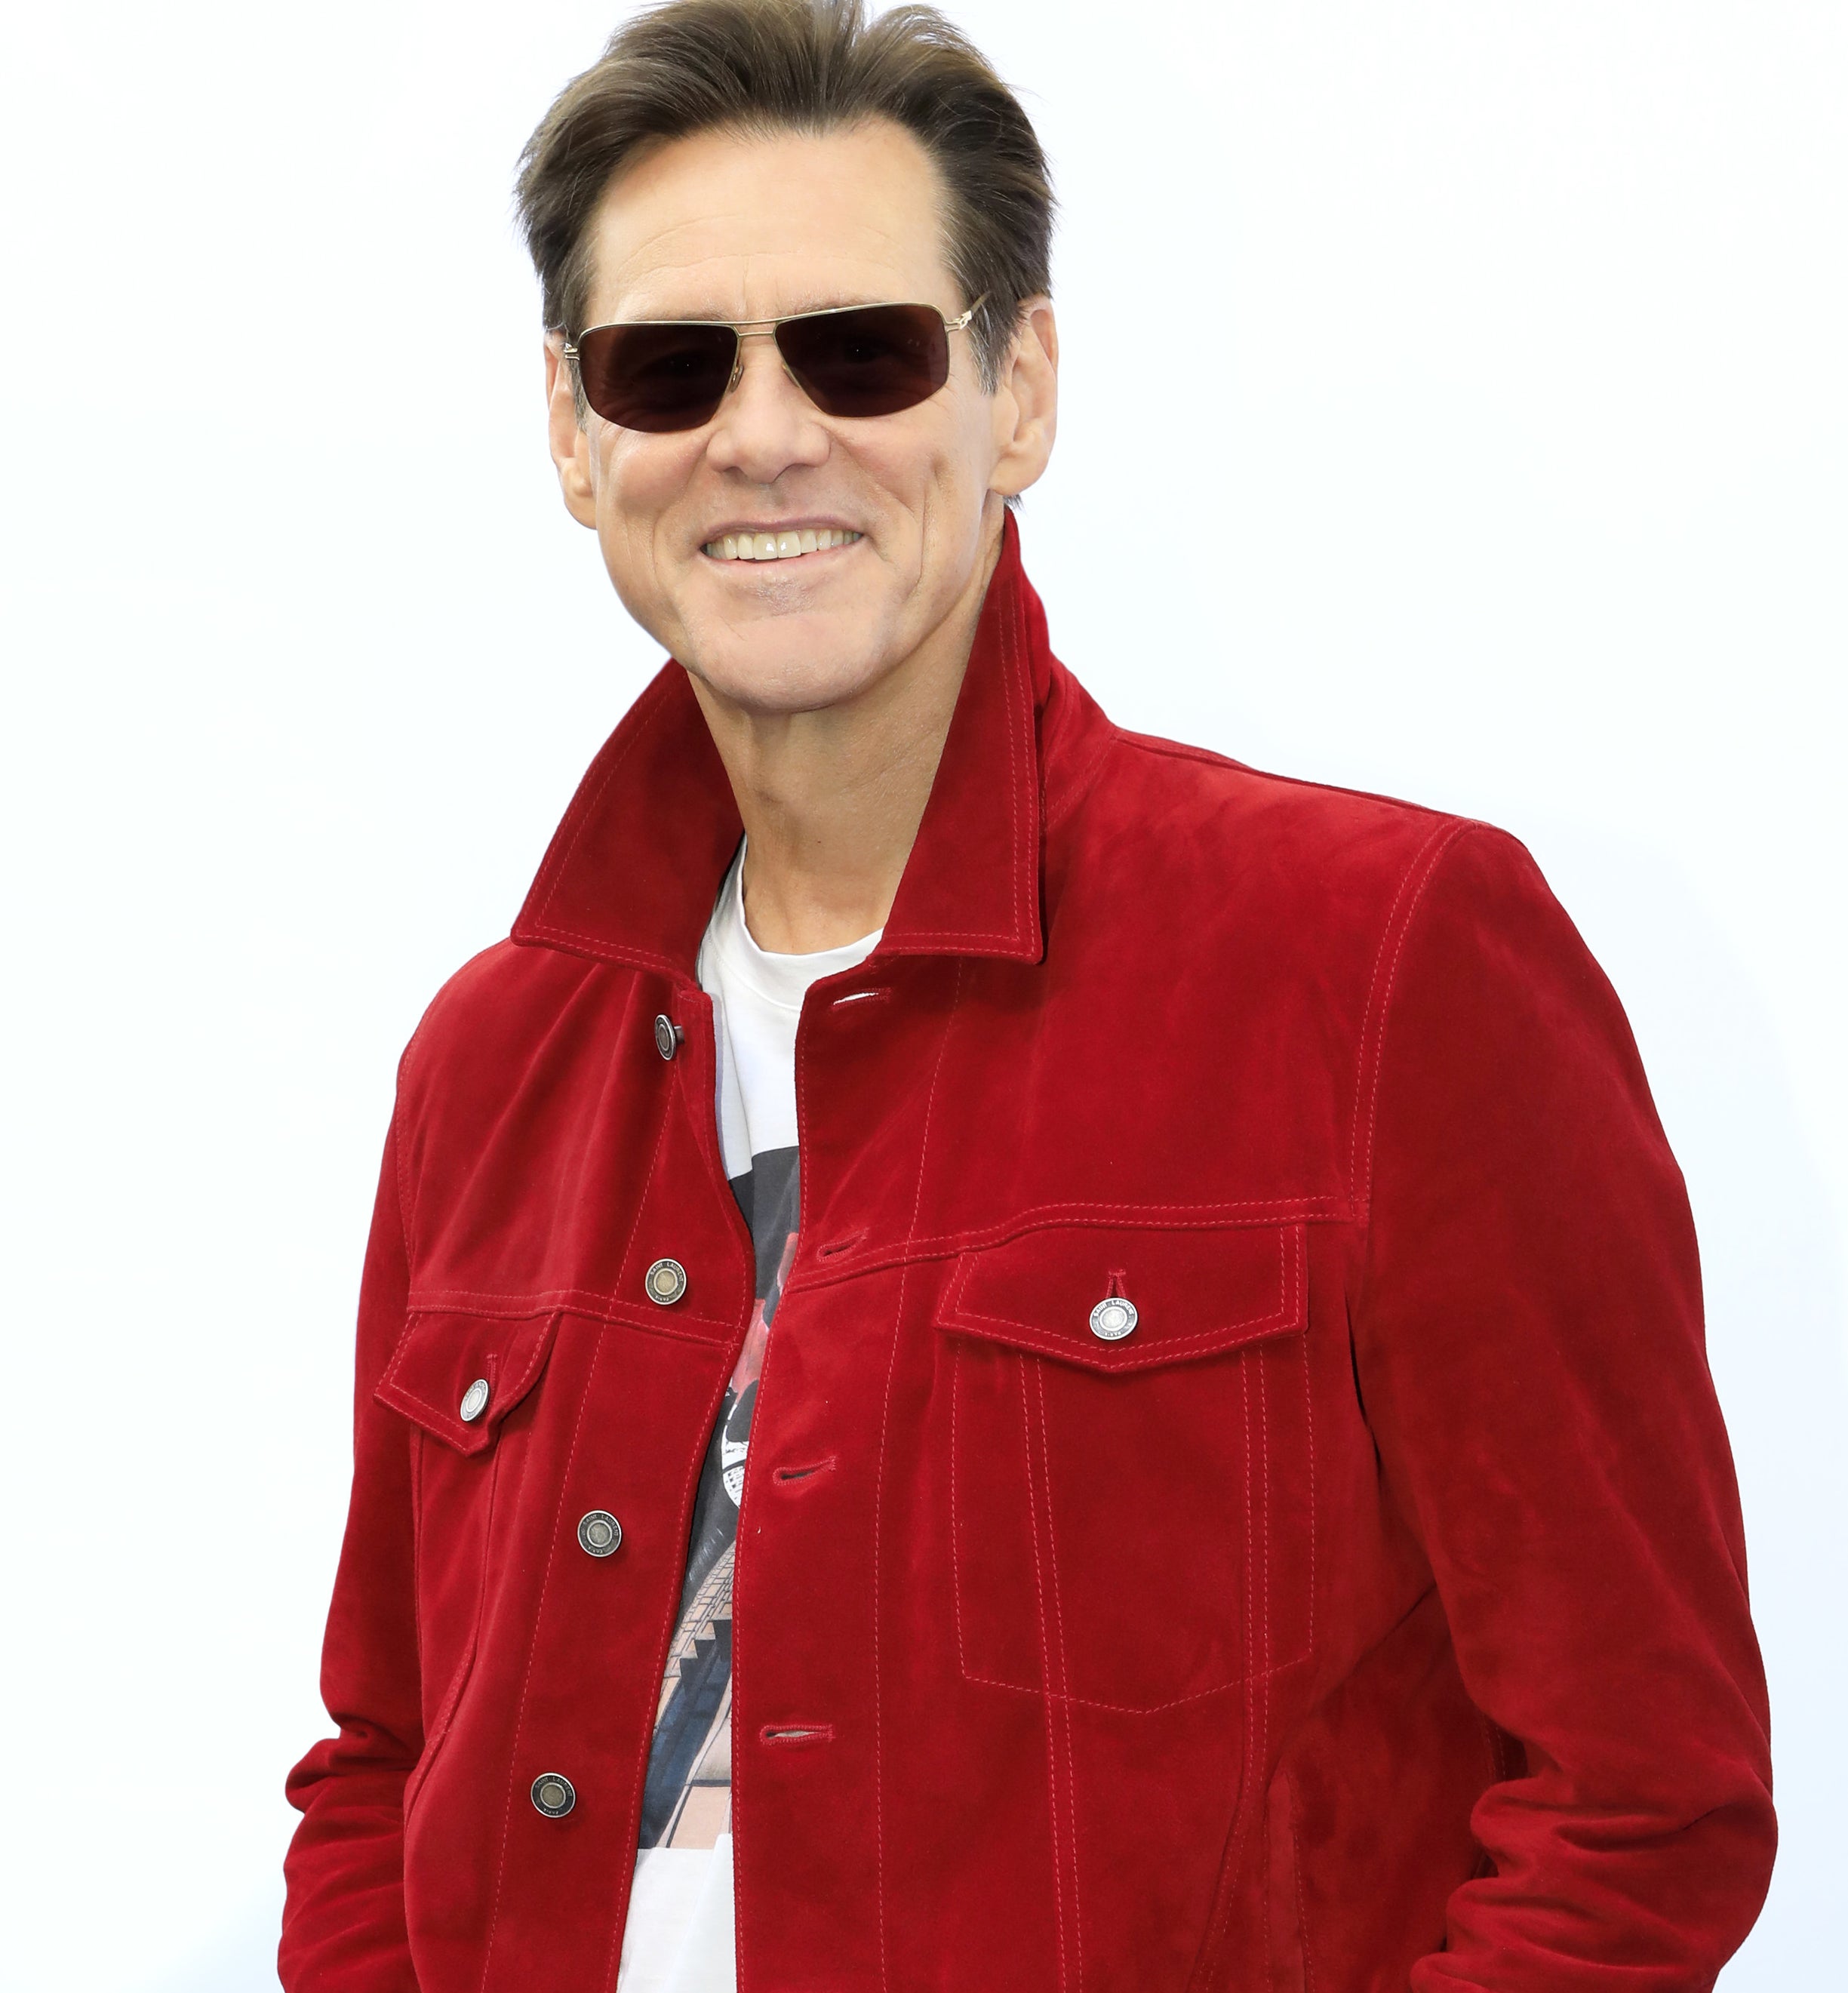 Jim Carrey attends the &#x27;Sonic The Hedgehog&#x27; Family Day Event at the Paramount Theatre on January 25, 2020